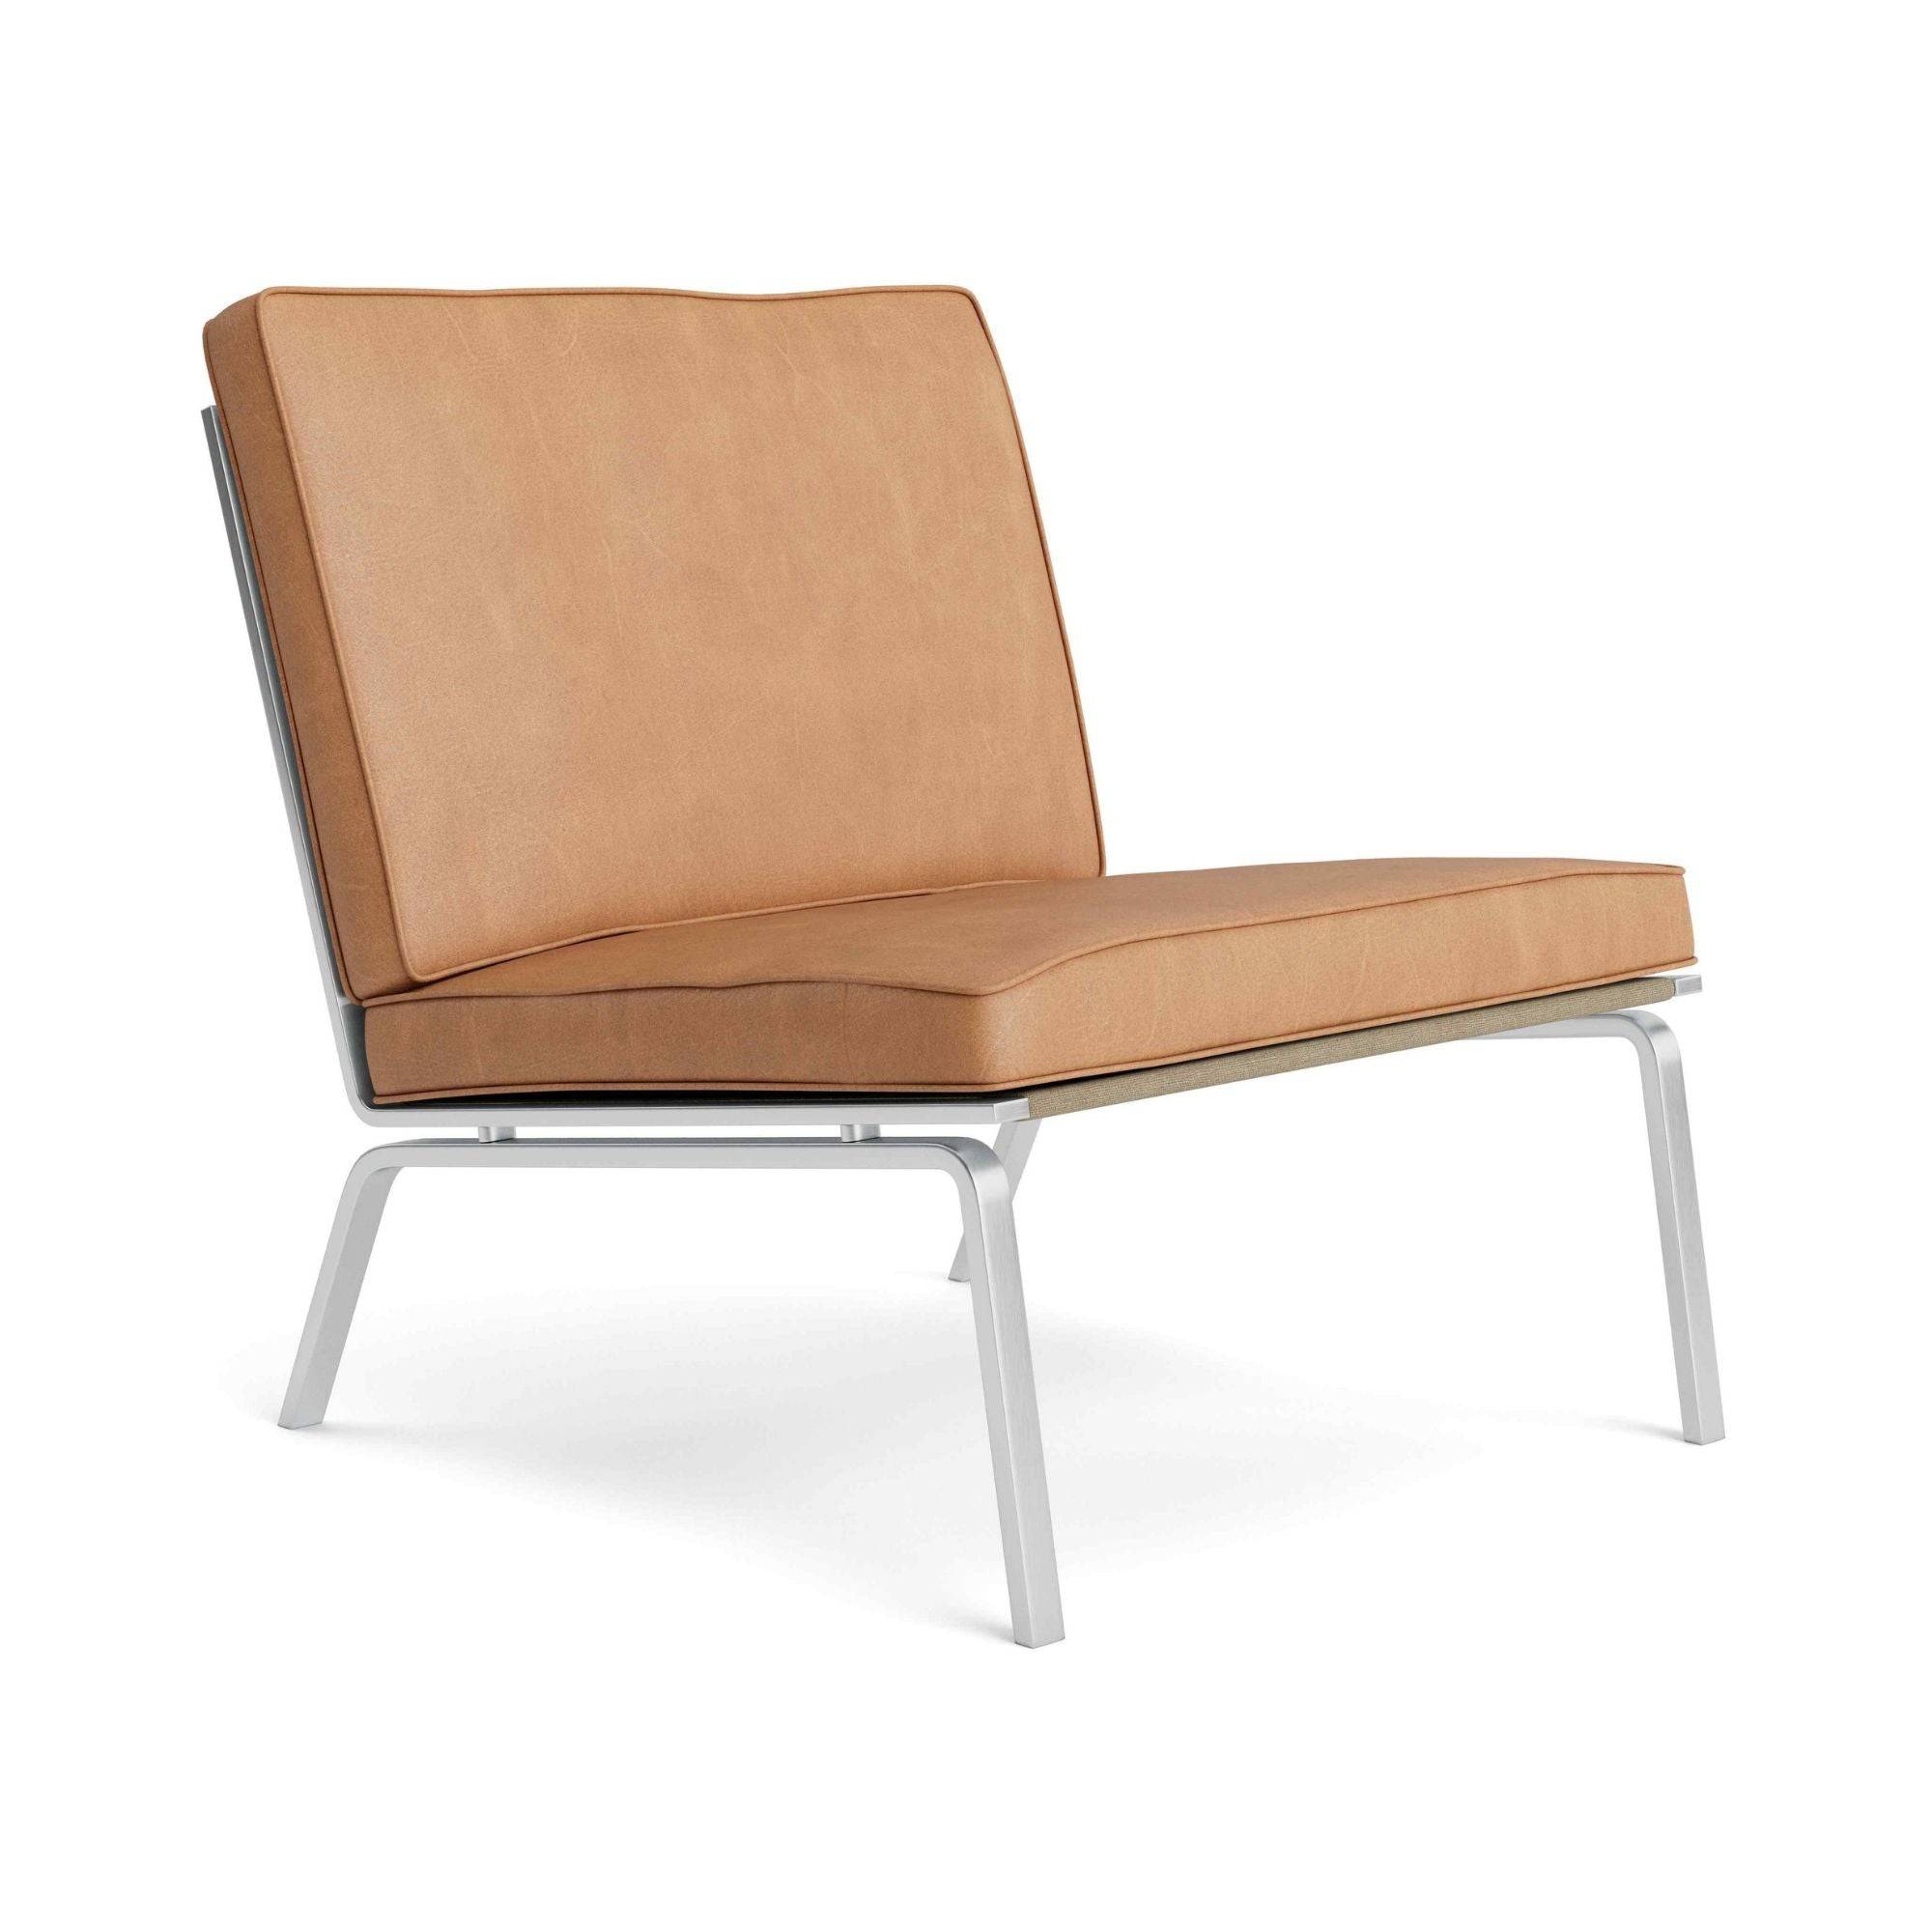 Man Lounge Chair - Leather - THAT COOL LIVING